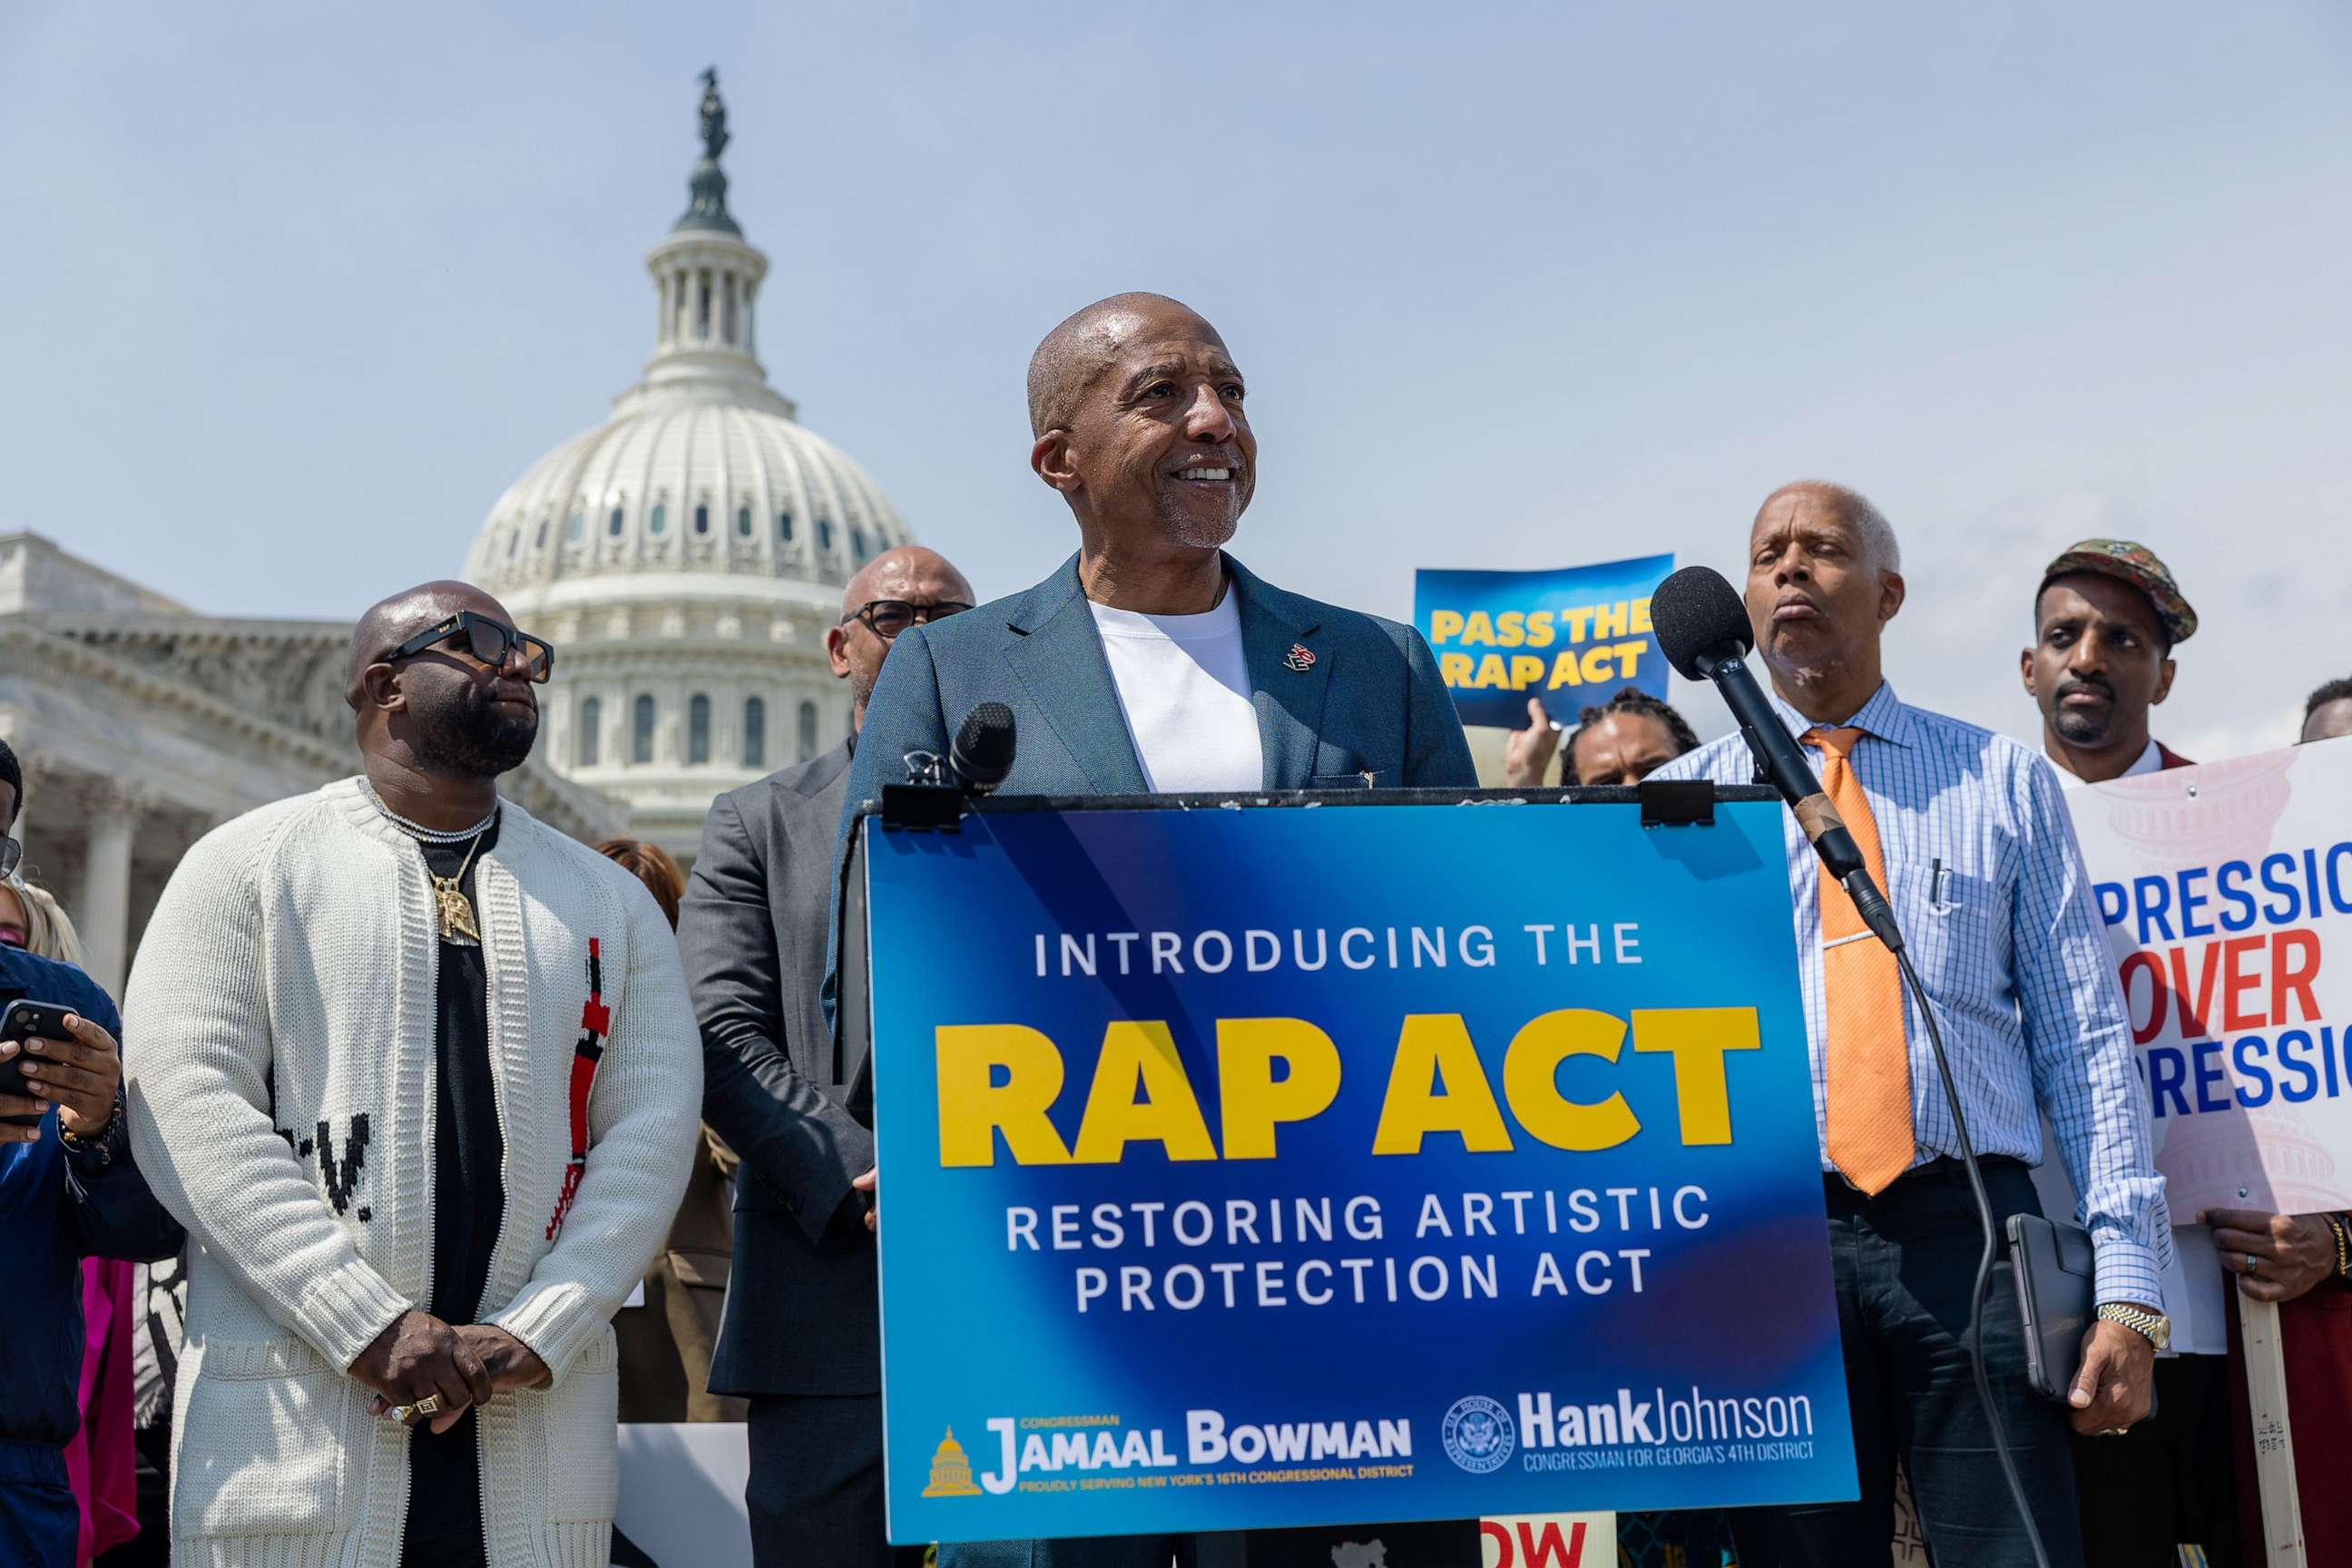 PHOTO: Kevin Liles, CEO of 300 Entertainment, speaks at a press conference on the re-introduction of Restoring Artistic Protection Act (RAP Act) in Washington, D.C., on April 27th, 2023.